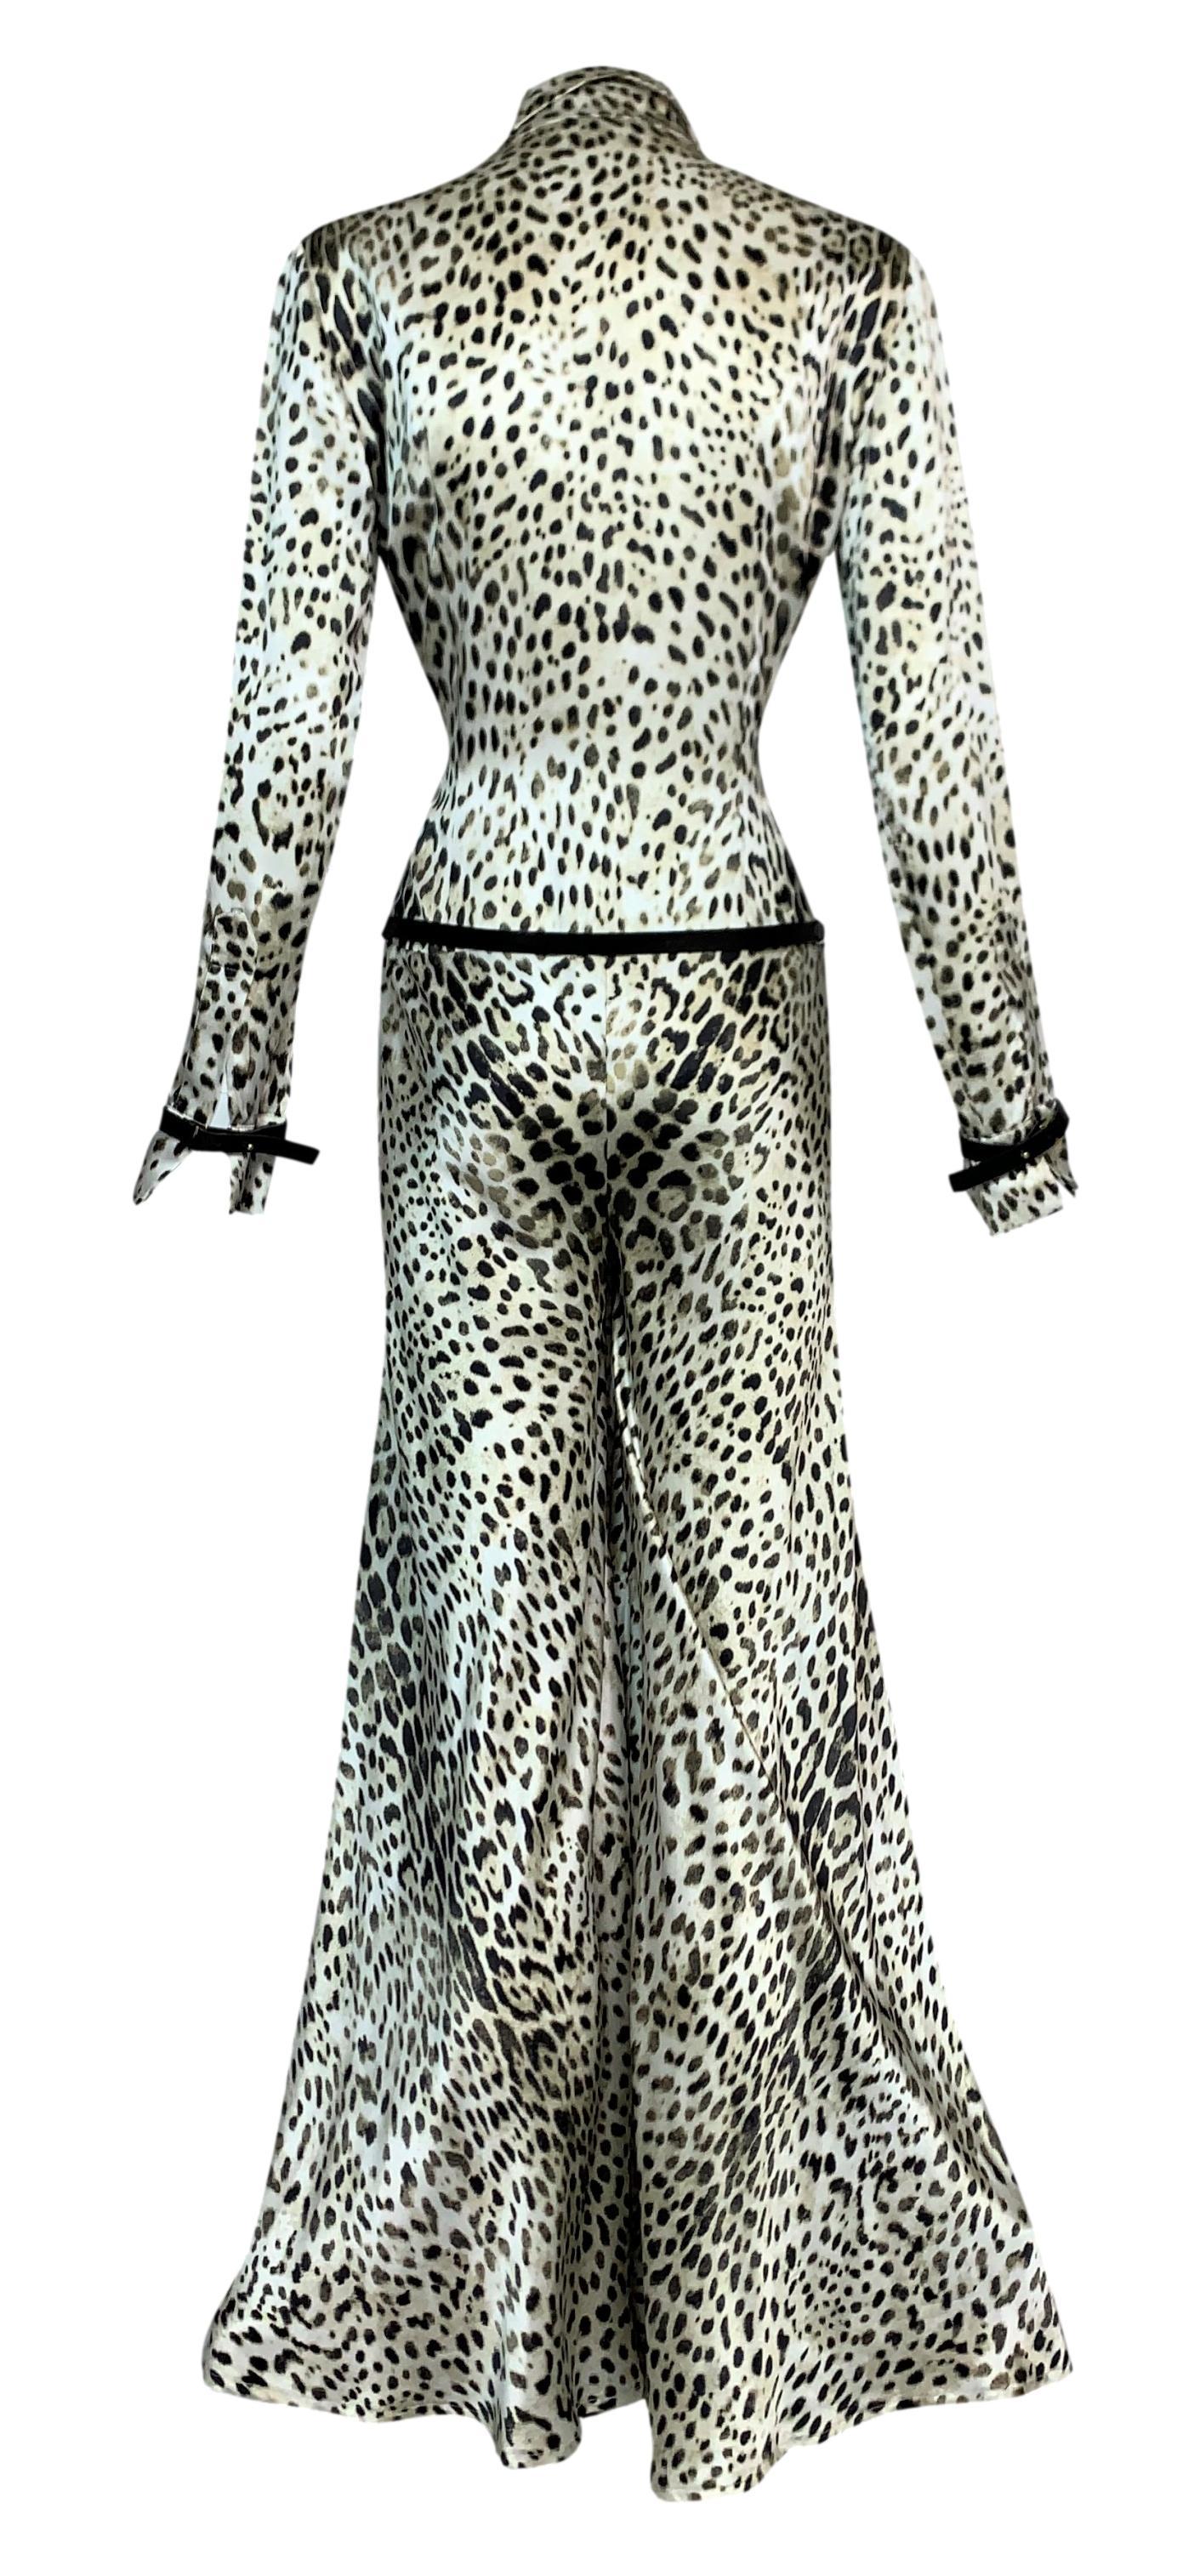 DESIGNER: S/S 2000 Roberto Cavalli

Please contact us for more images or information

CONDITION: Excellent

FABRIC: Silk

COUNTRY: Italy

SIZE: M

MEASUREMENTS; provided as a courtesy only- not a guarantee of fit: 

Chest: 35-40